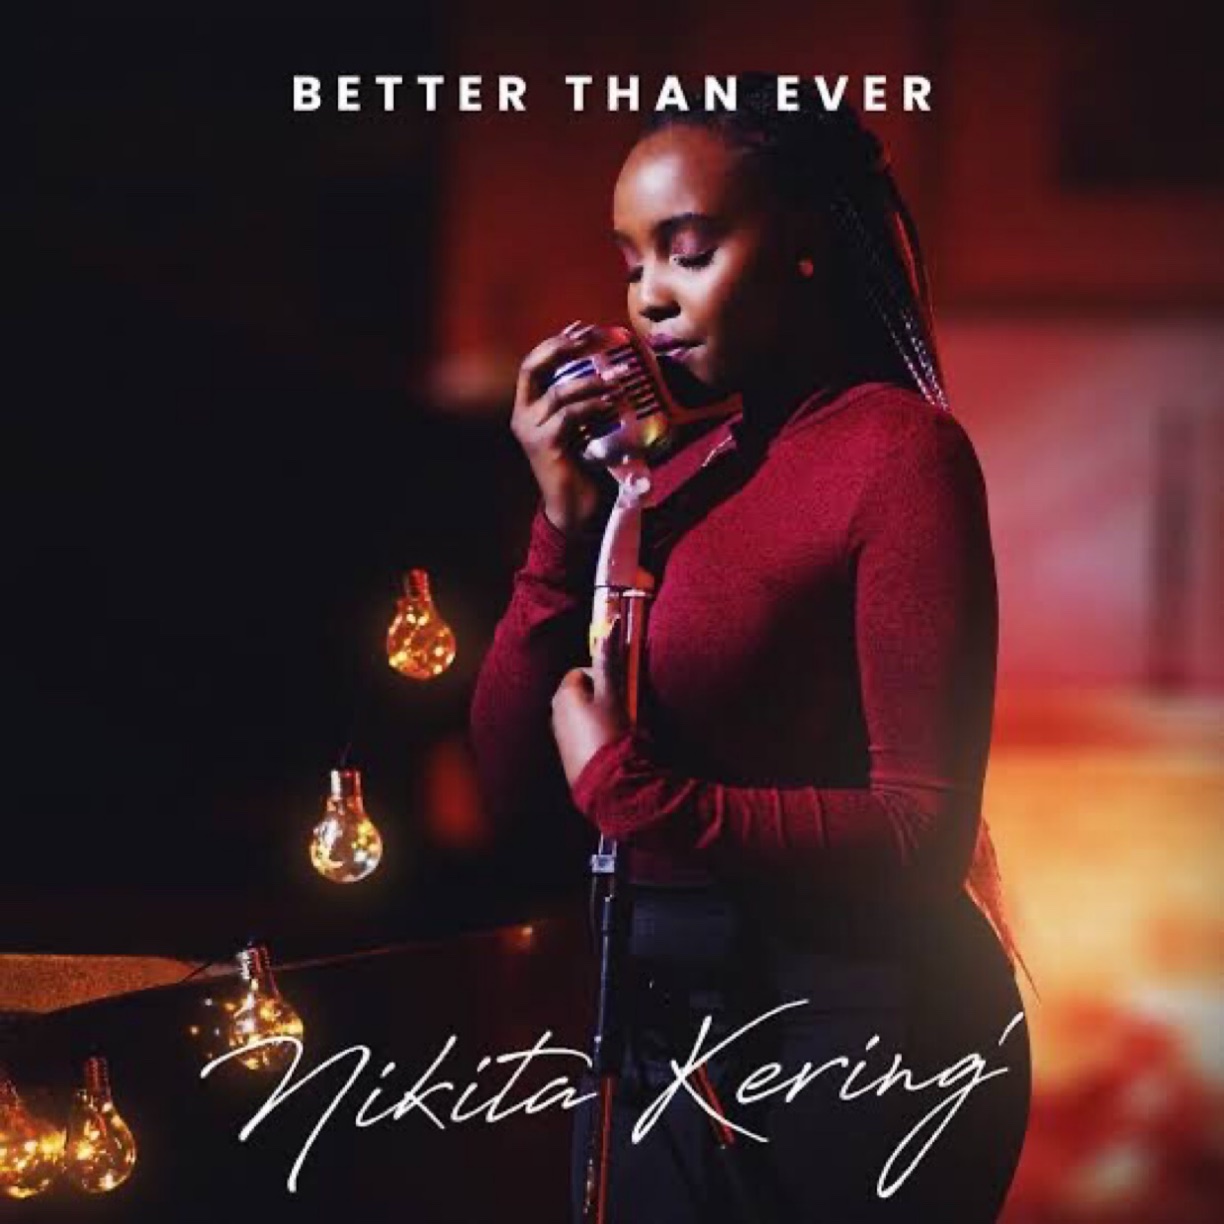 5 facts about beautiful and exceptionally talented hitmaker, Nikita Kering